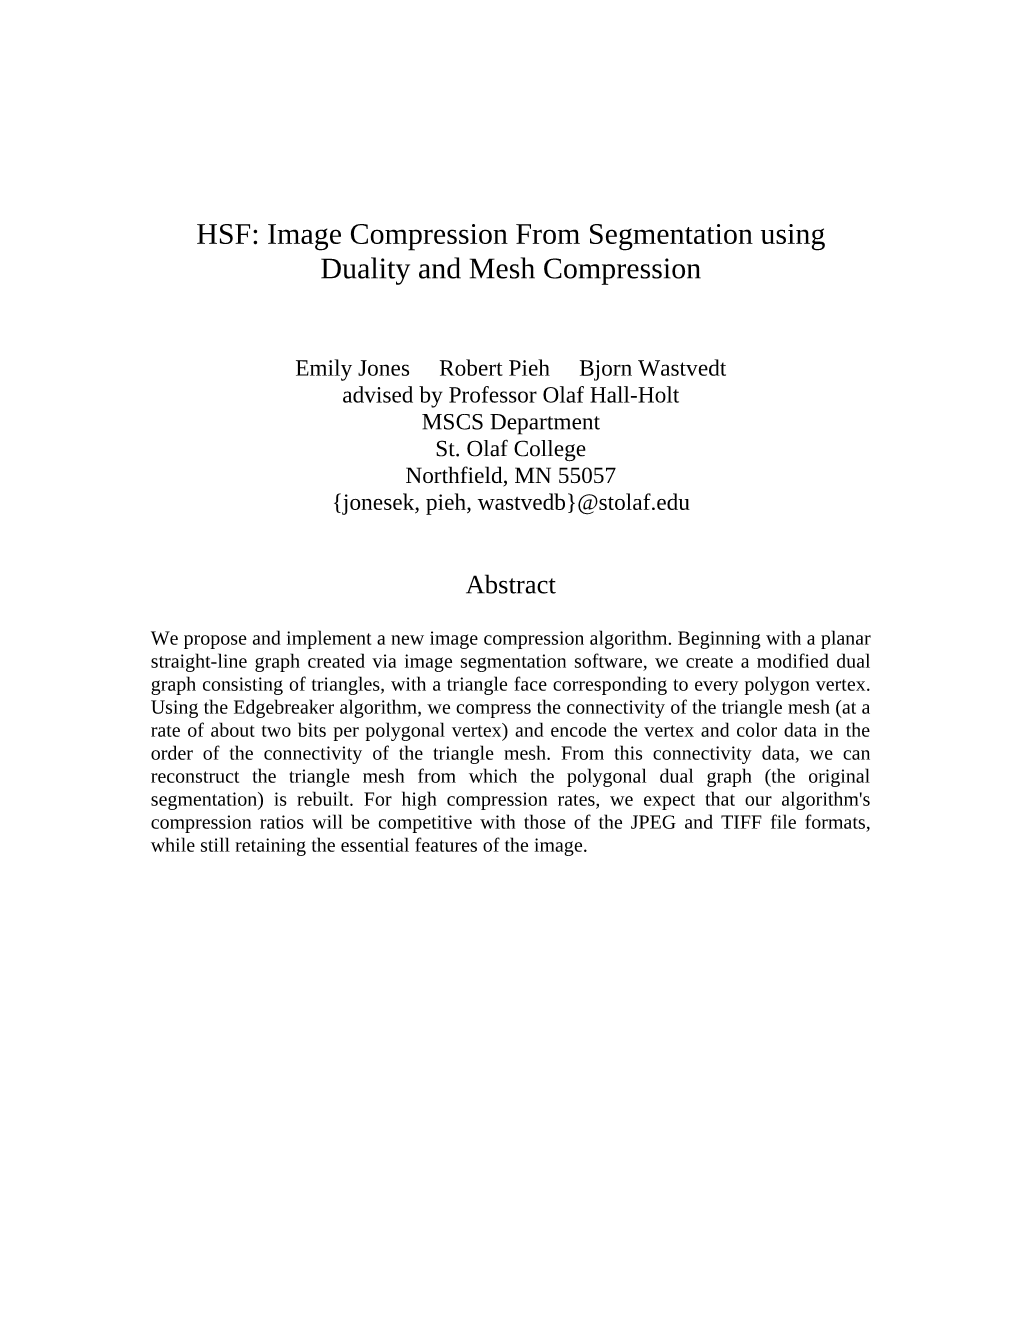 HSF: Image Compression from Segmentation Using Duality and Mesh Compression